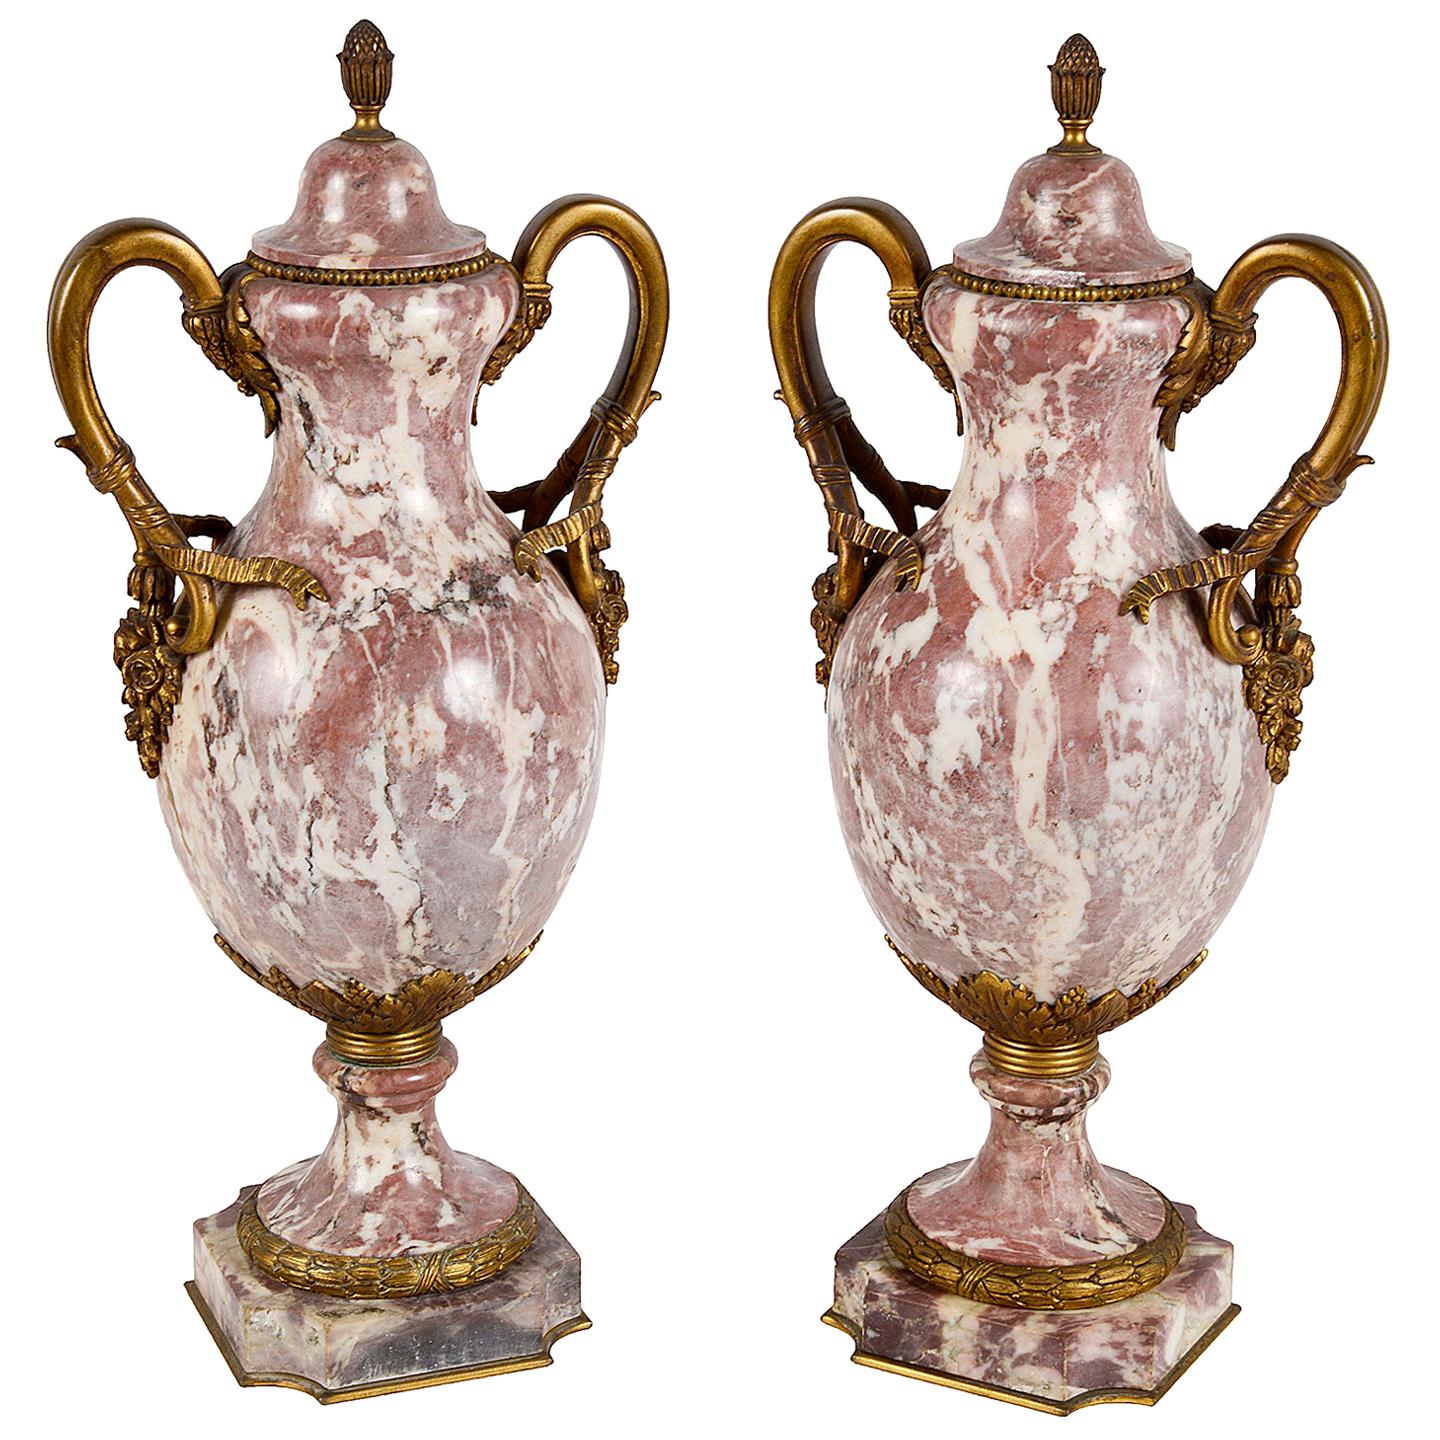 Pair of French 19th Century Breccia Marble Vases